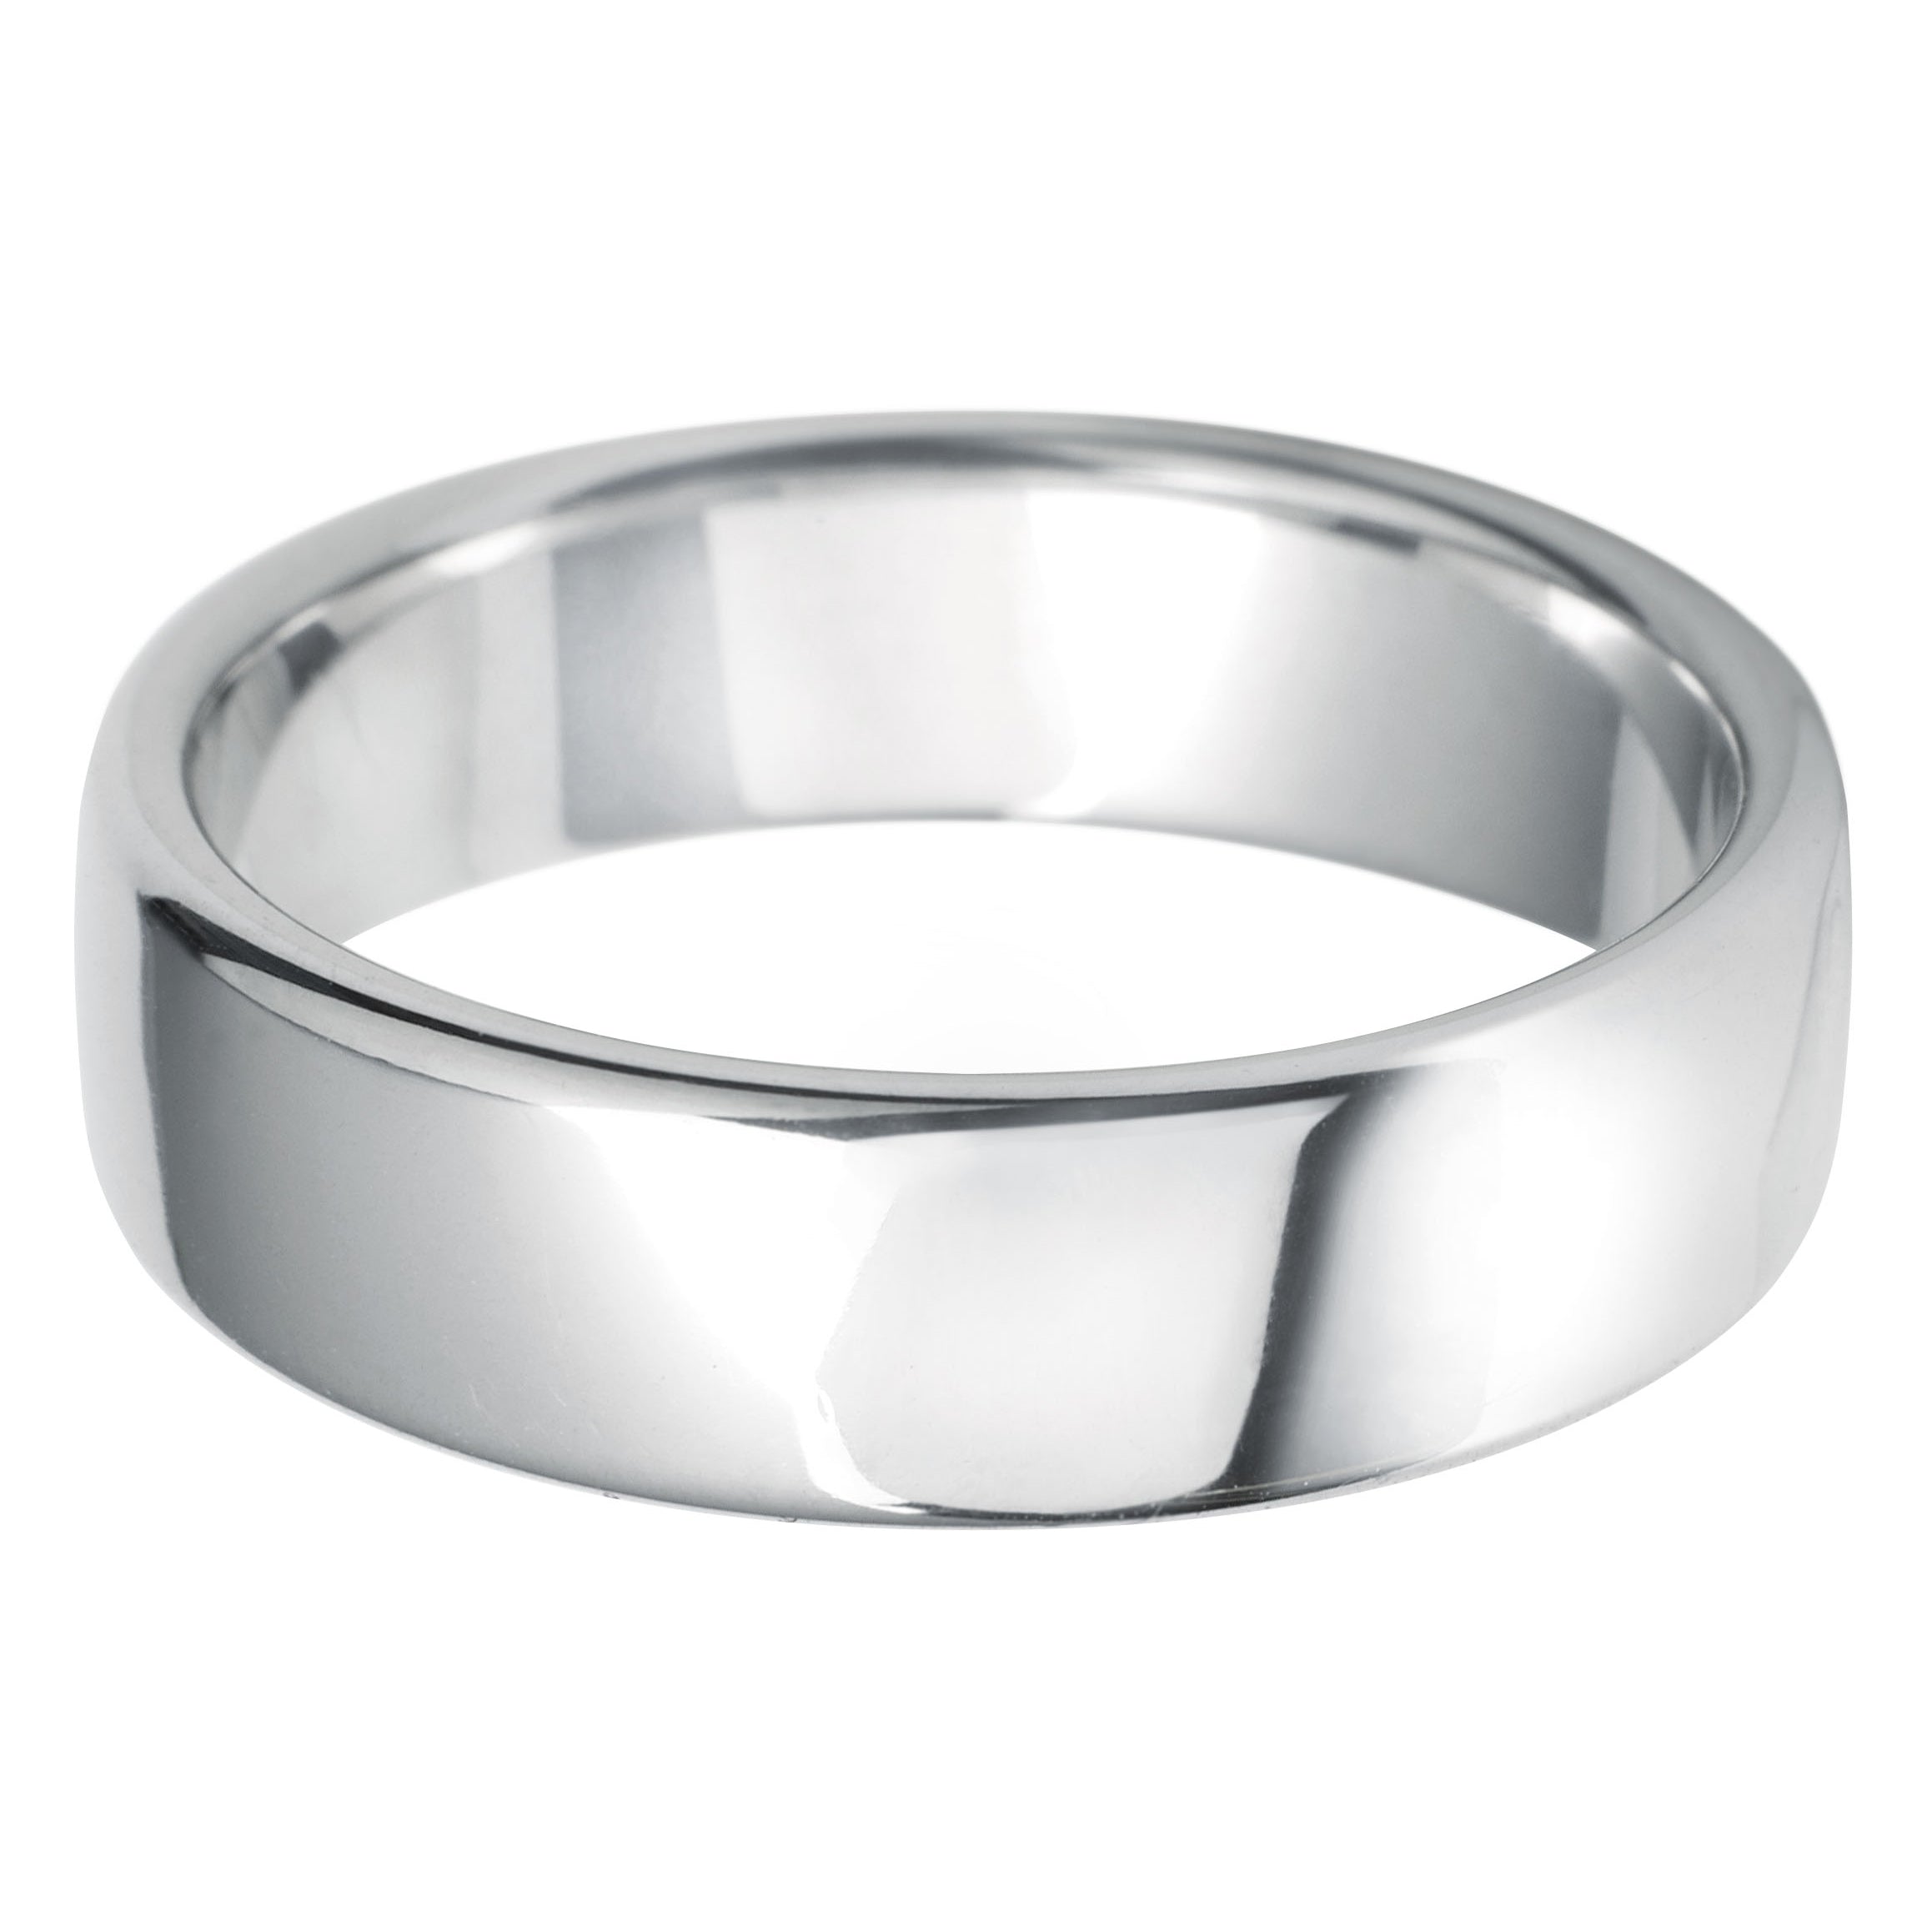 7mm Rounded Flat lightweight Wedding Ring